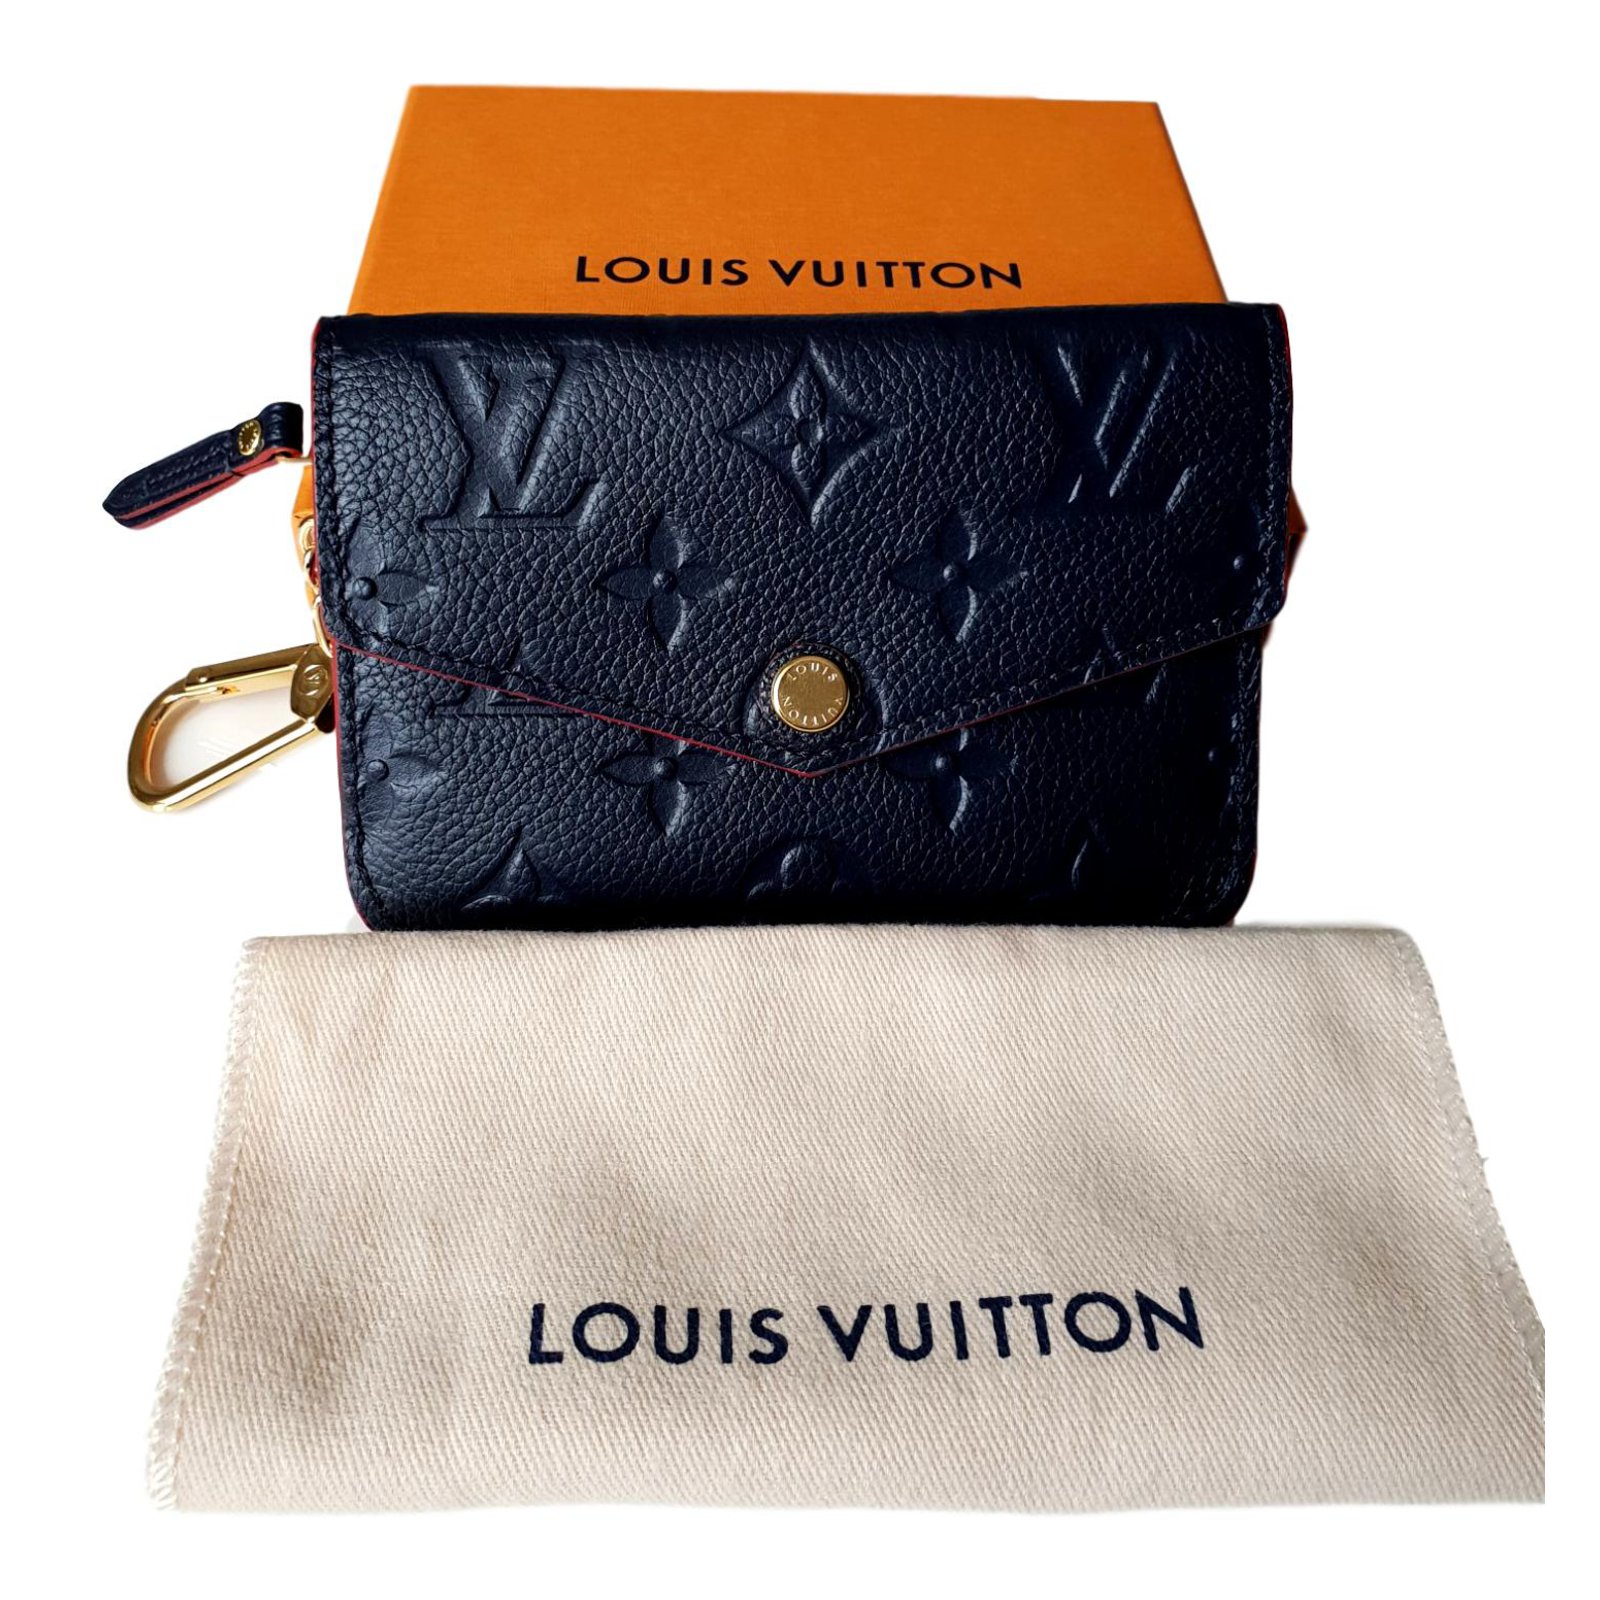 Louis Vuitton KEY POUCH IN LEATHER FOOTPRINT Red Navy blue ref